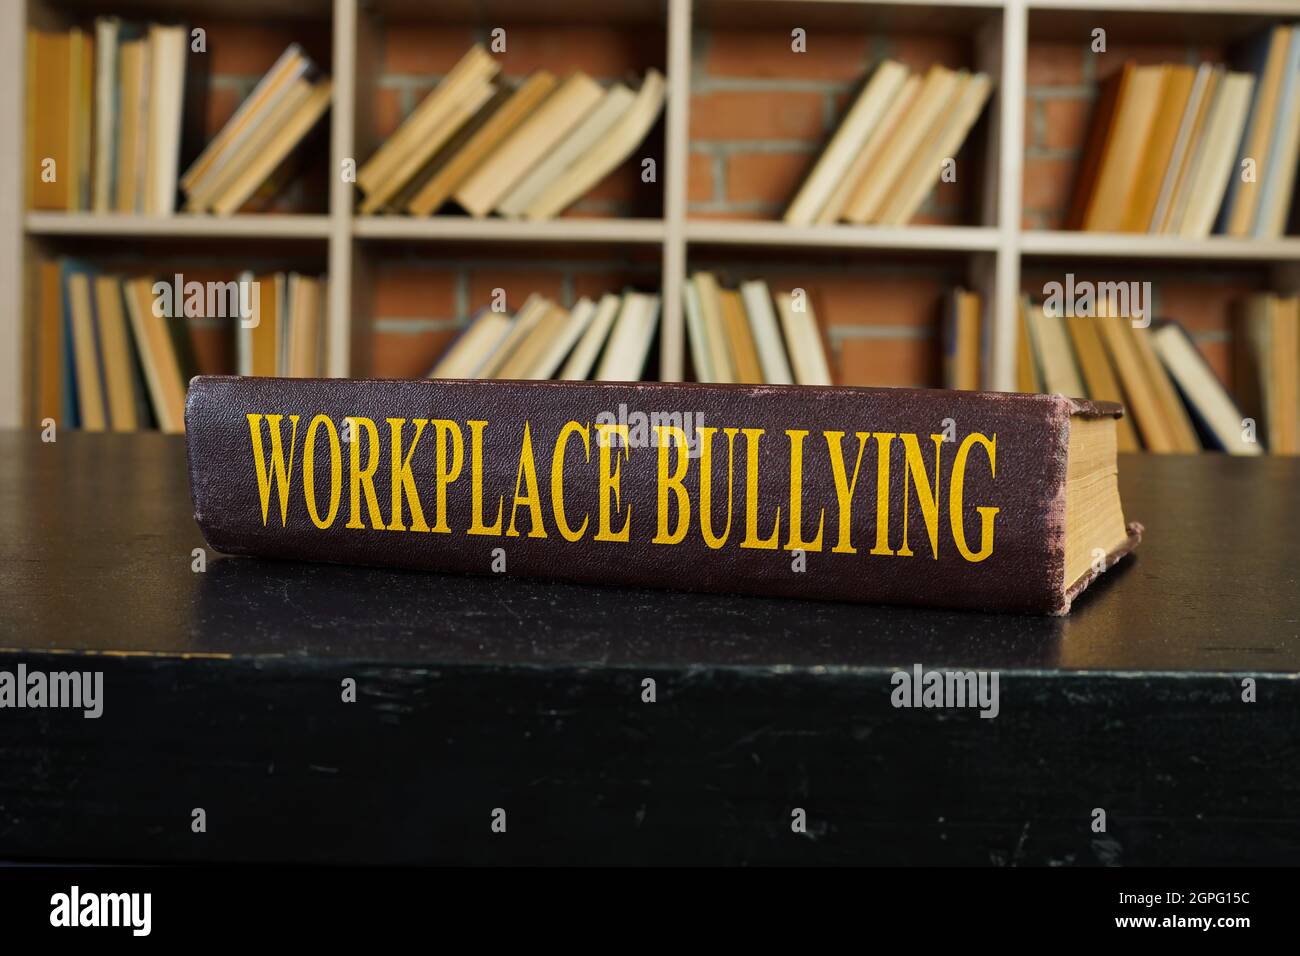 Book with rules about workplace bullying on the surface. Stock Photo